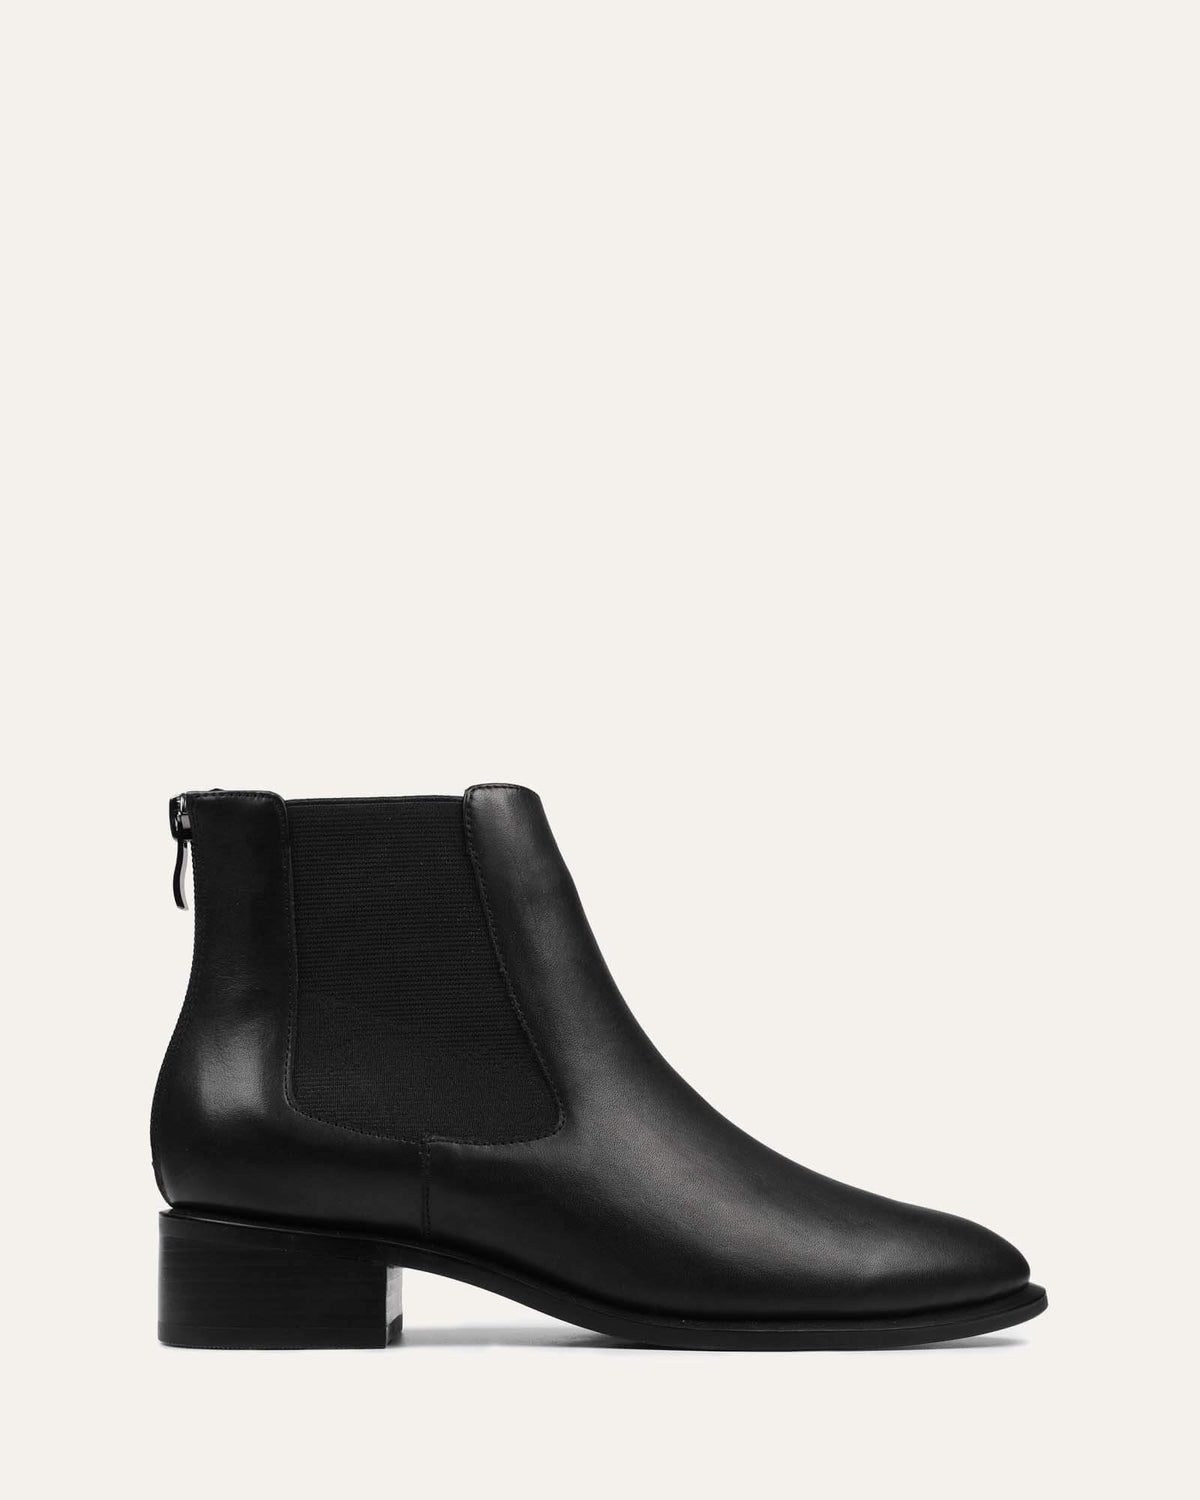 MILLA FLAT ANKLE BOOTS BLACK LEATHER